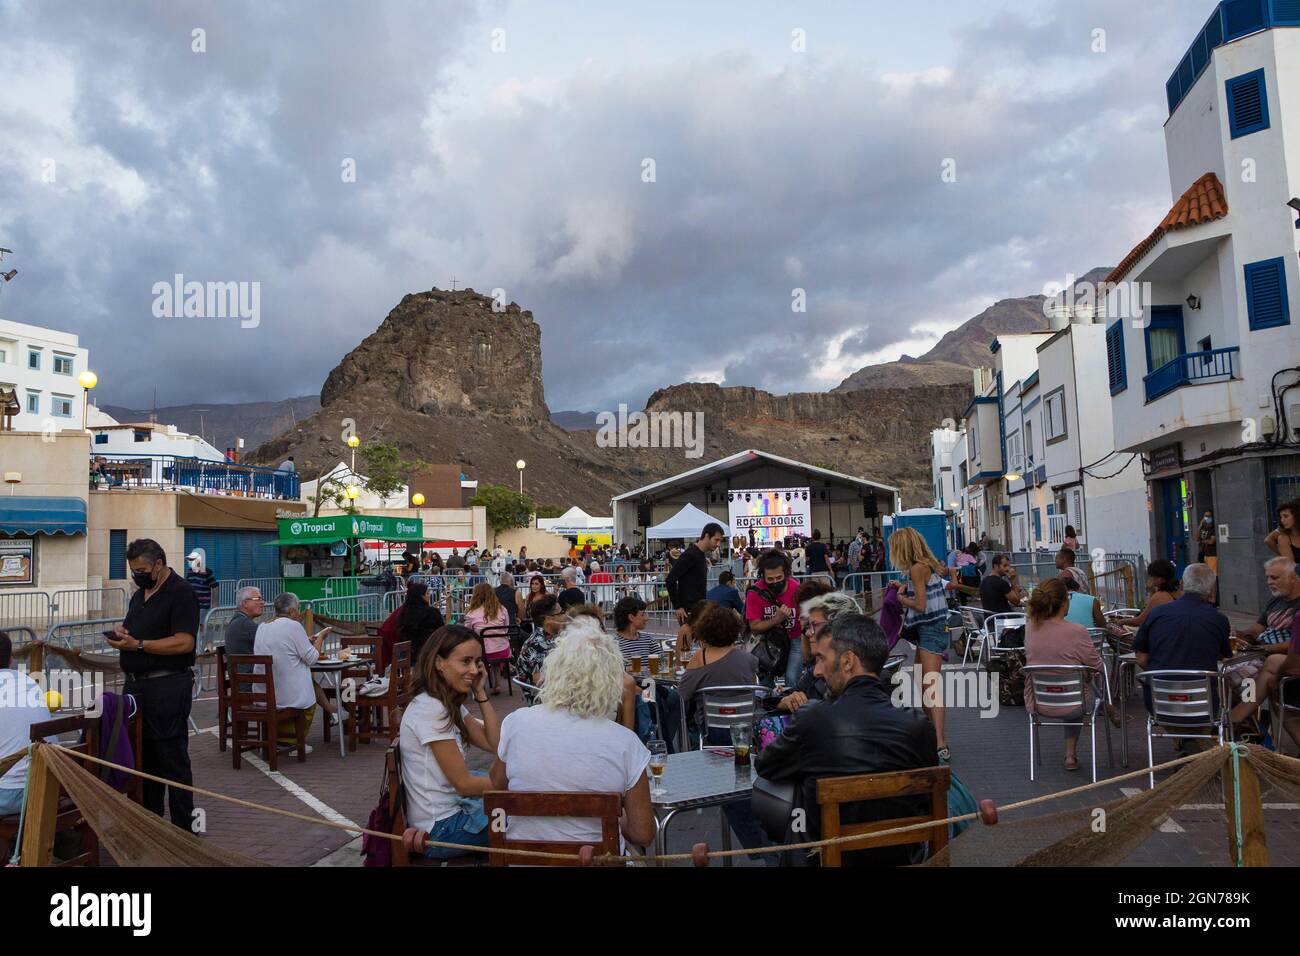 Atmosphere at the Rock and Books Festival in Agaete Stock Photo